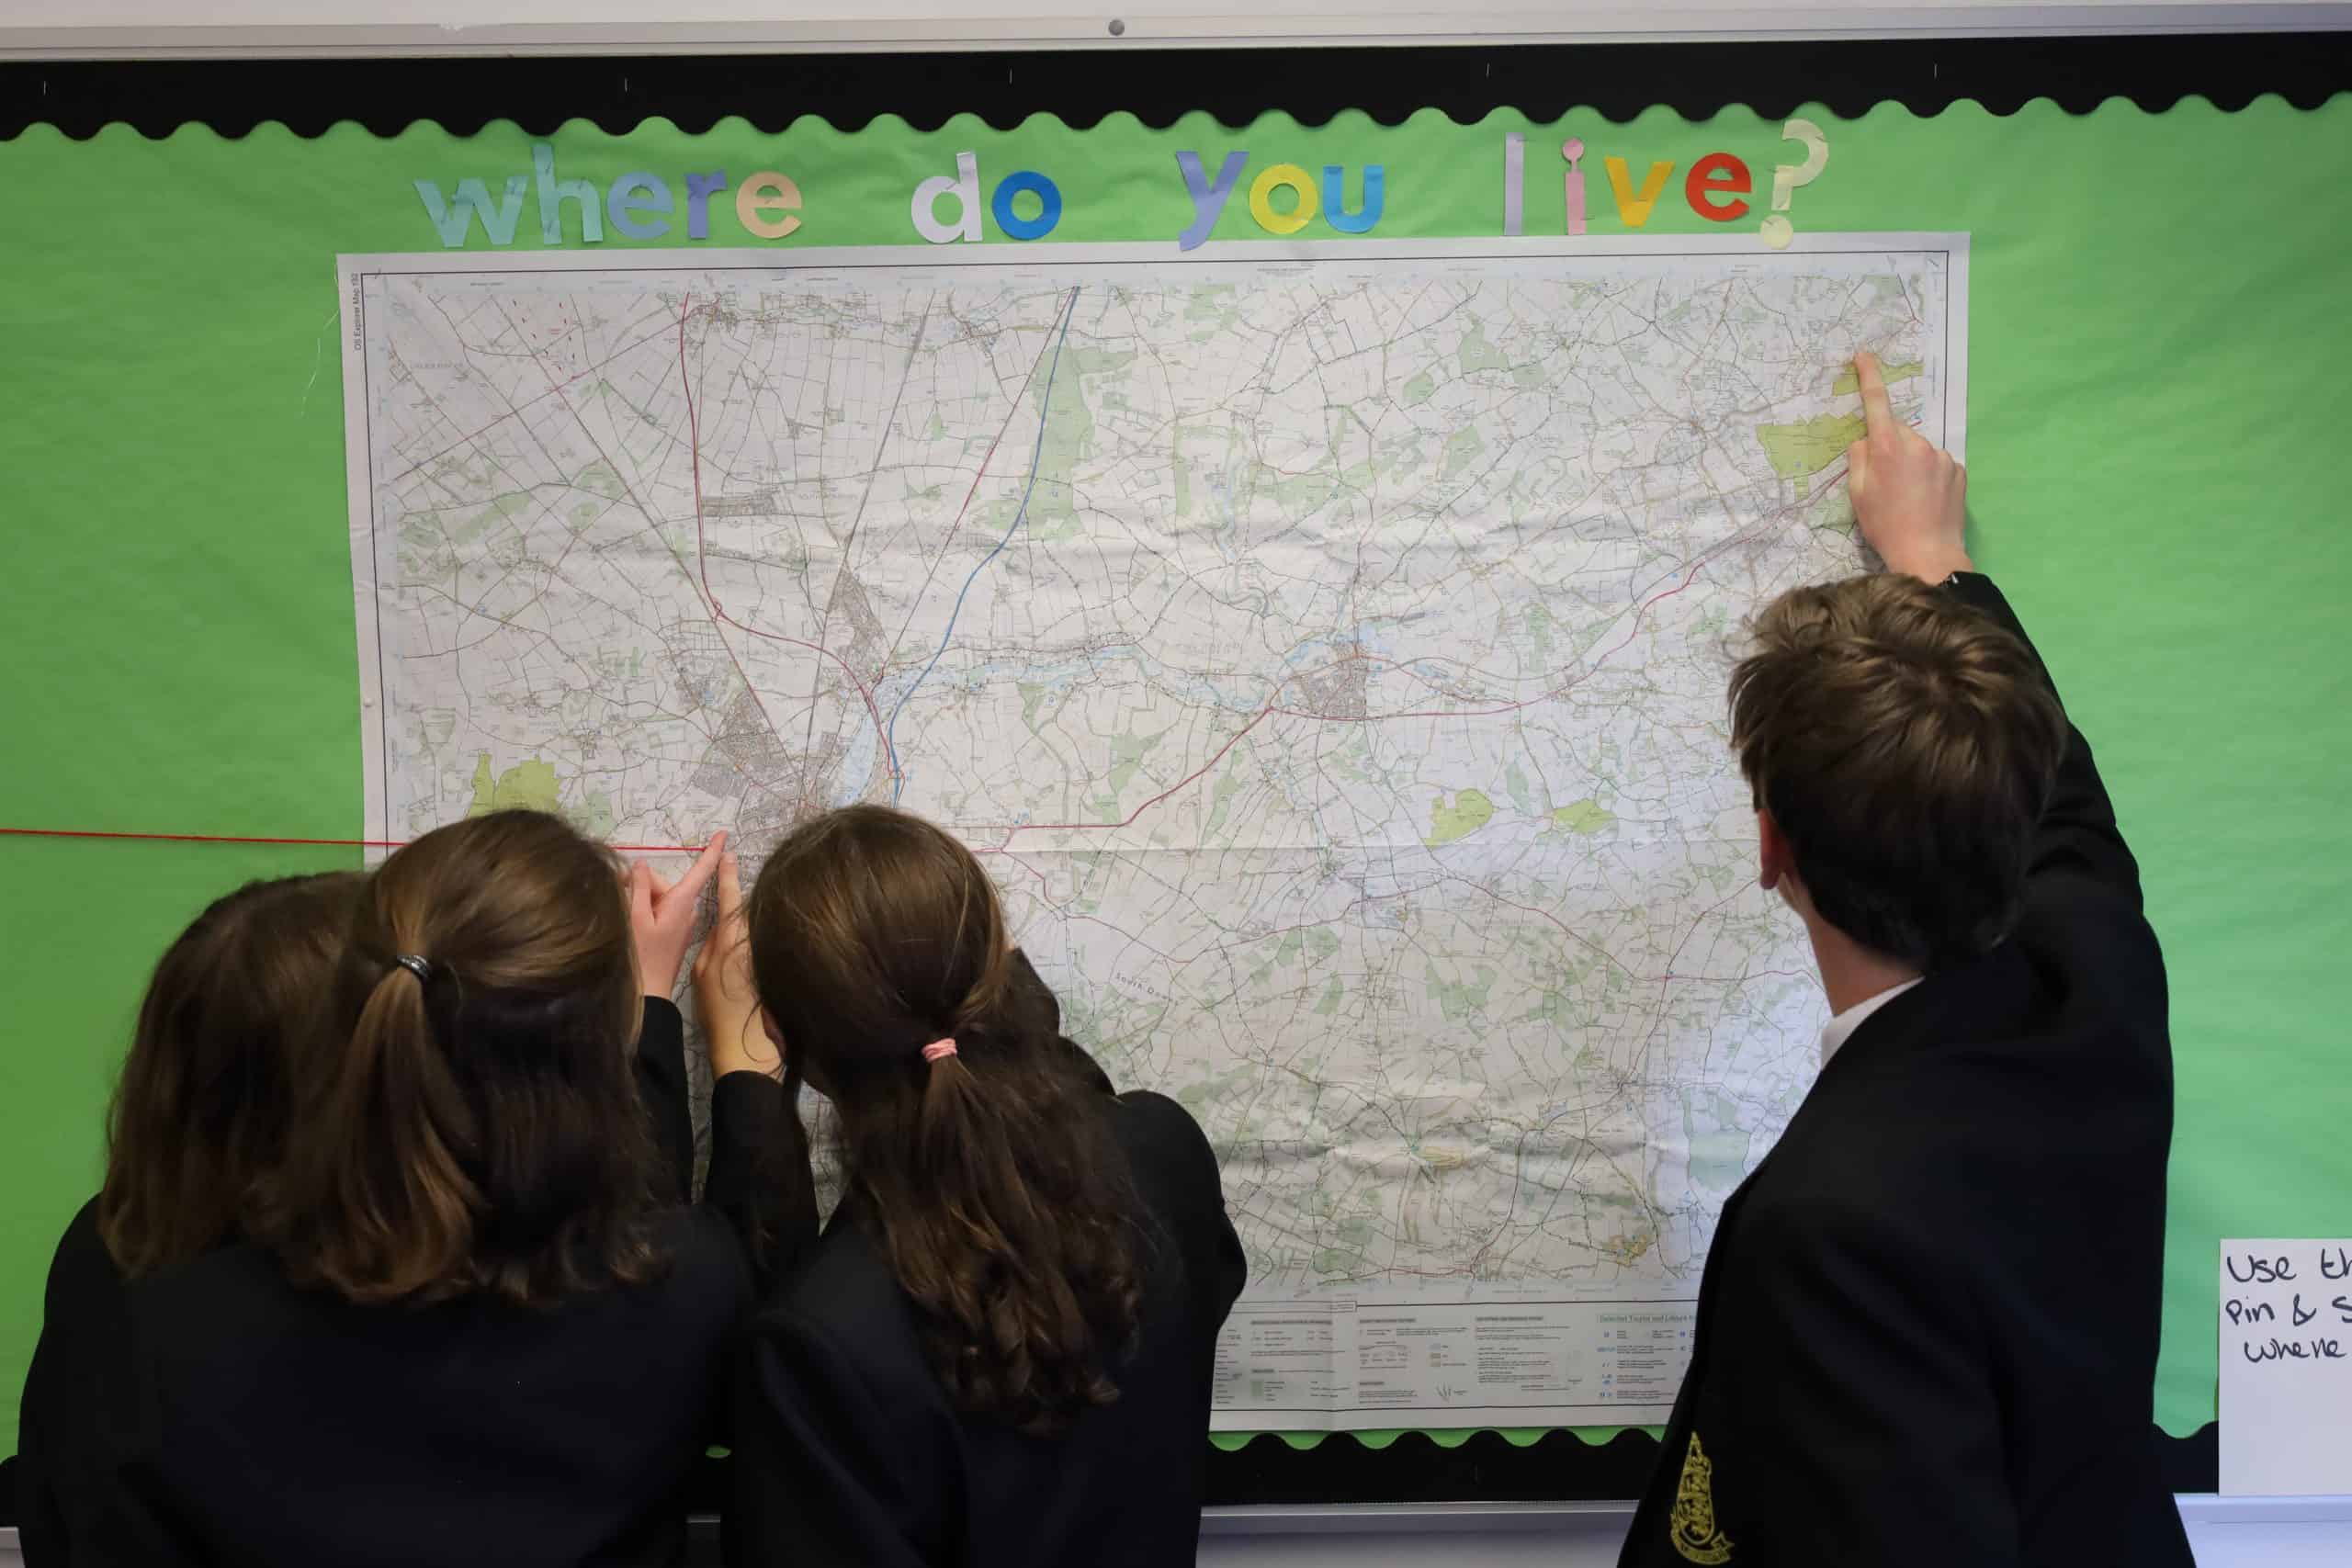 Picture shows 4 children in Kings' School uniform pointing to different places on a map which is displayed on a wall